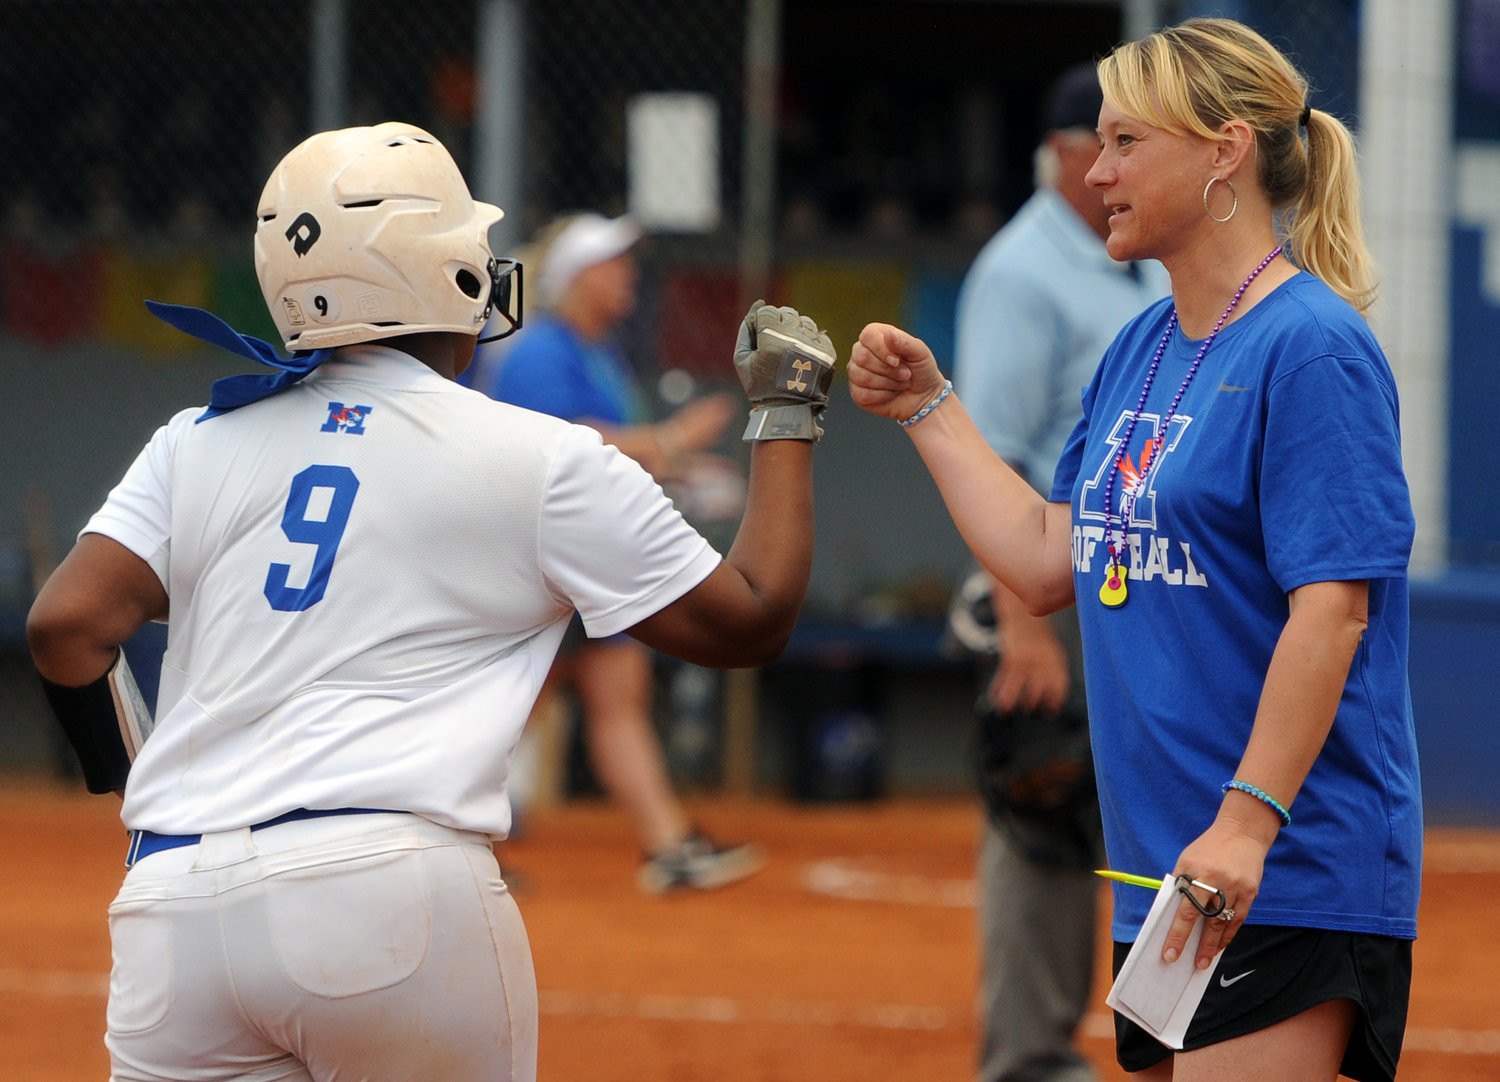 Tigerette coach Amy Bonner catches a fist bump from Kaniyah Taylor as she rounds third after crushing a home run against Spring Hill.